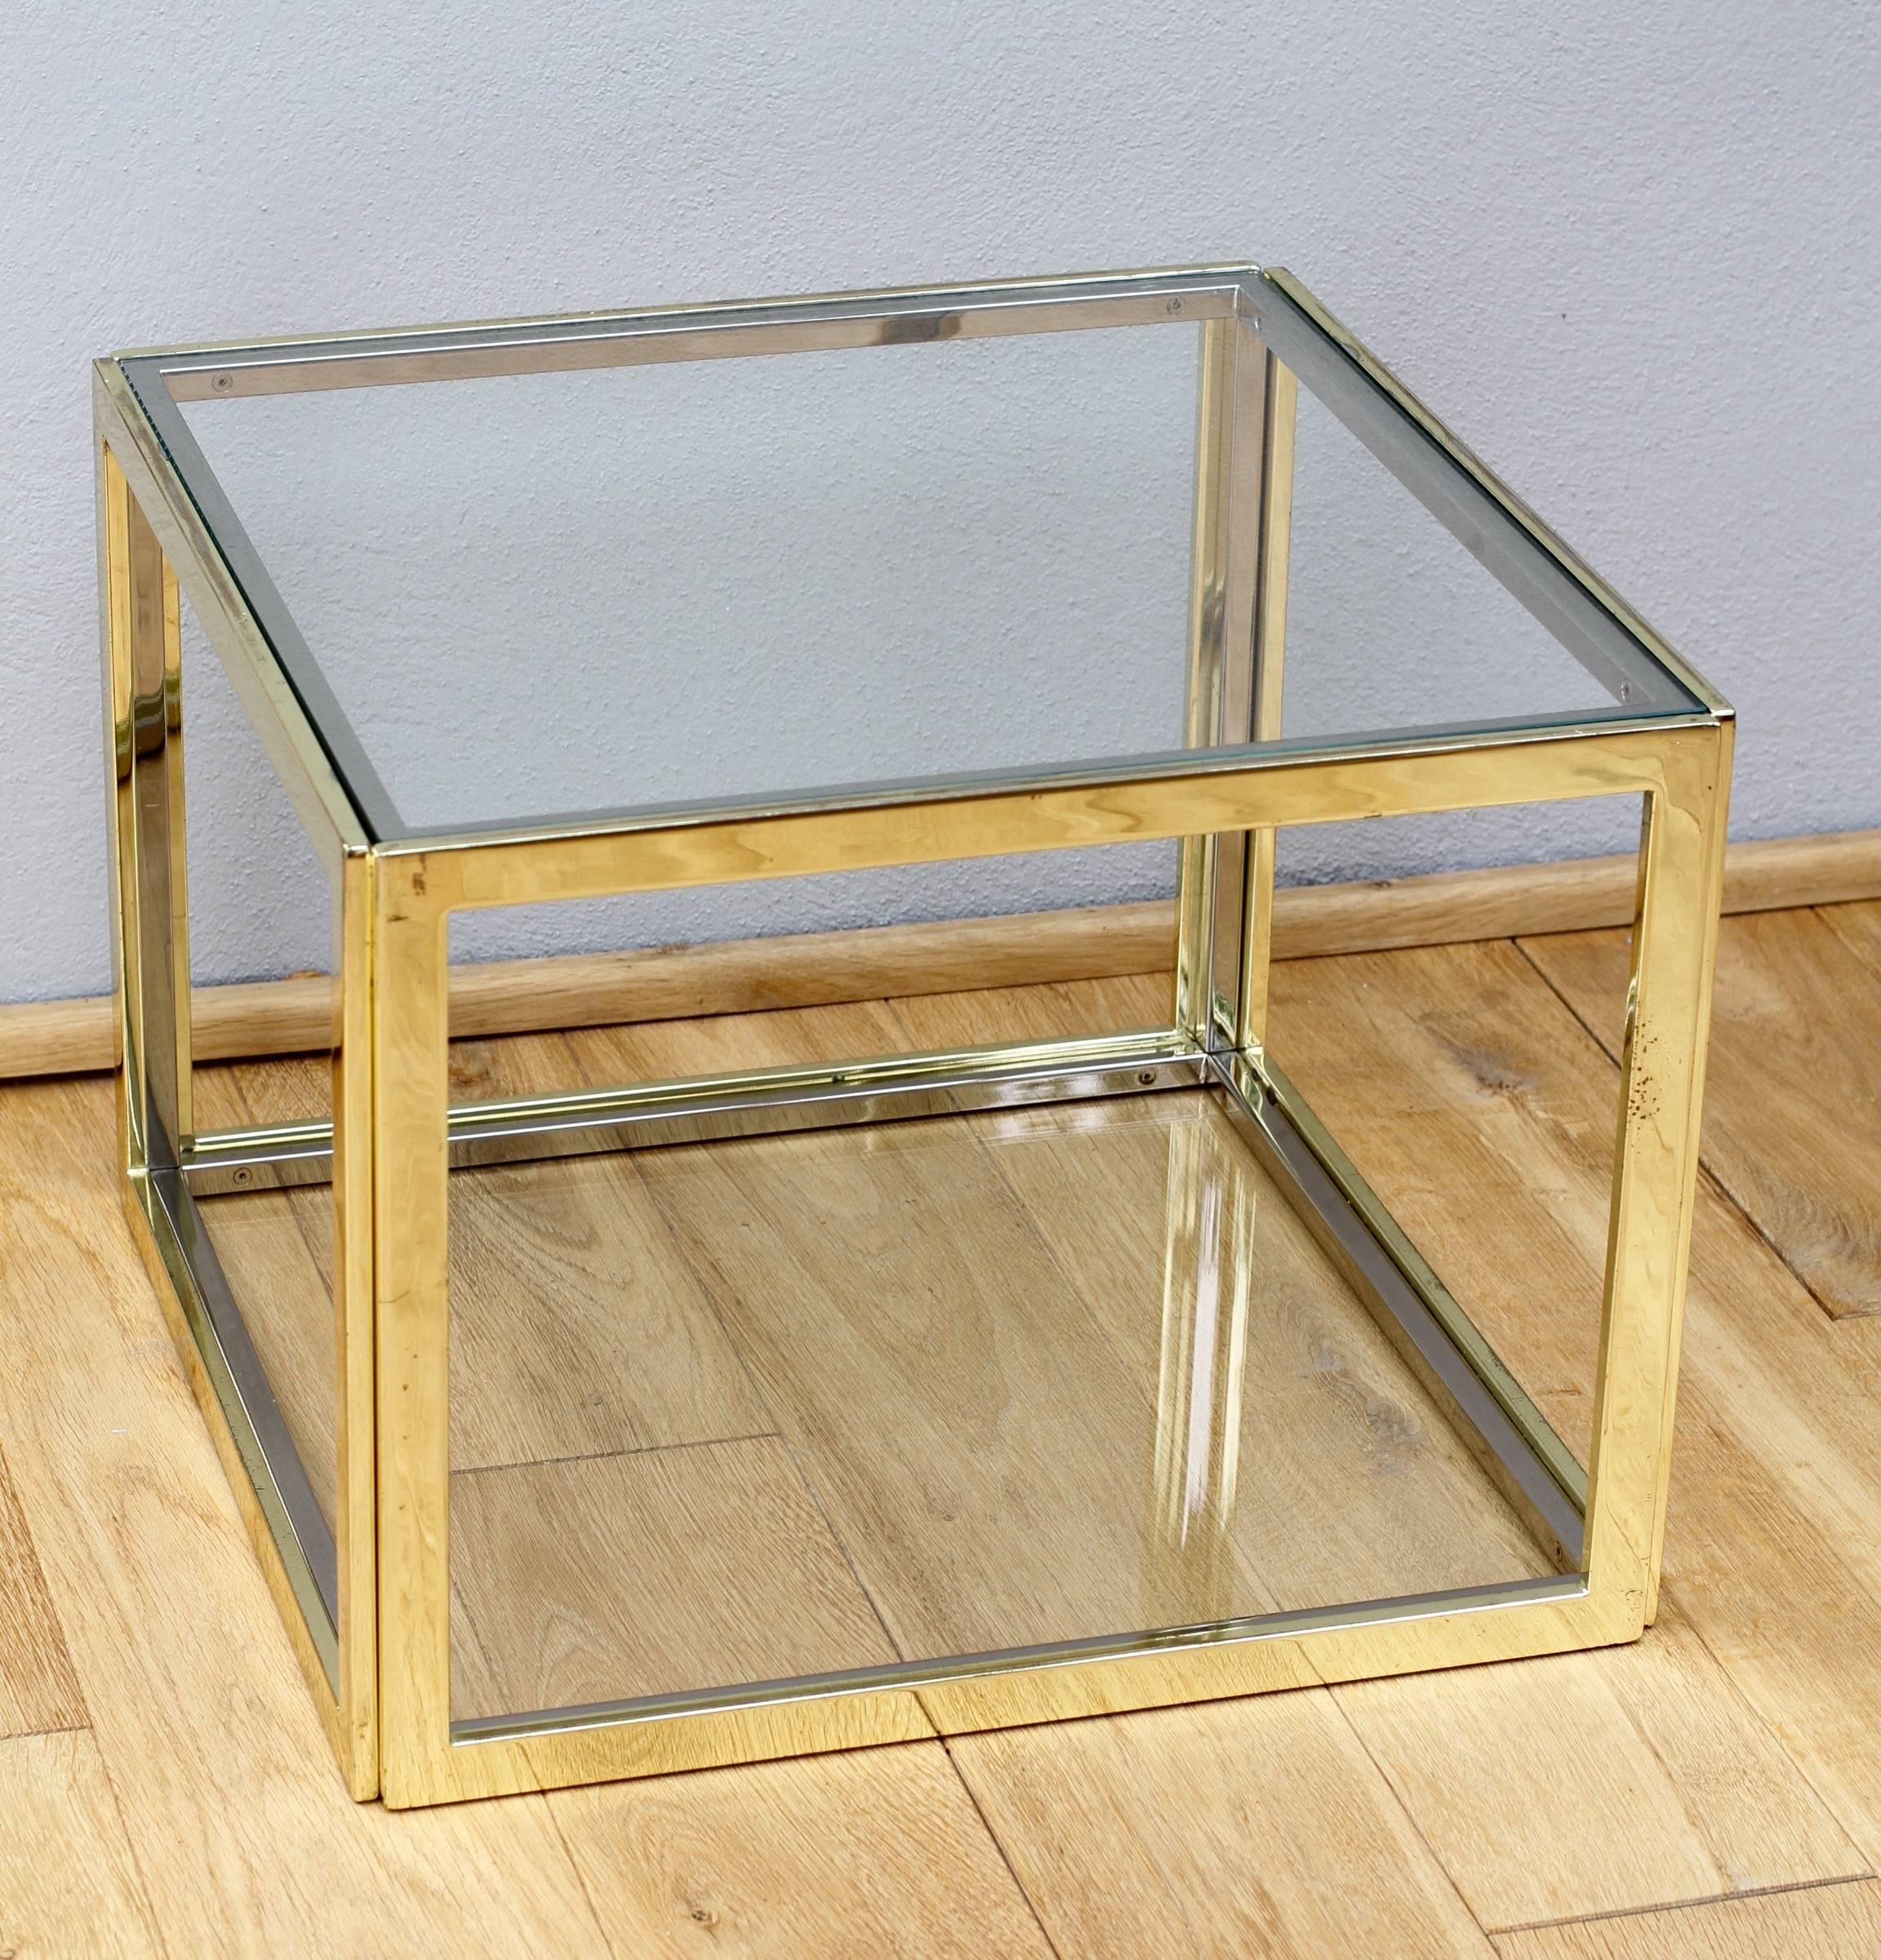 A stunning bi-color (bi-colour) side table by Maison Charles, circa 1970. These tables are usually found as a set of four which go together with a large square coffee table.

Comprising a chrome-plated metal cube covered on all sides with